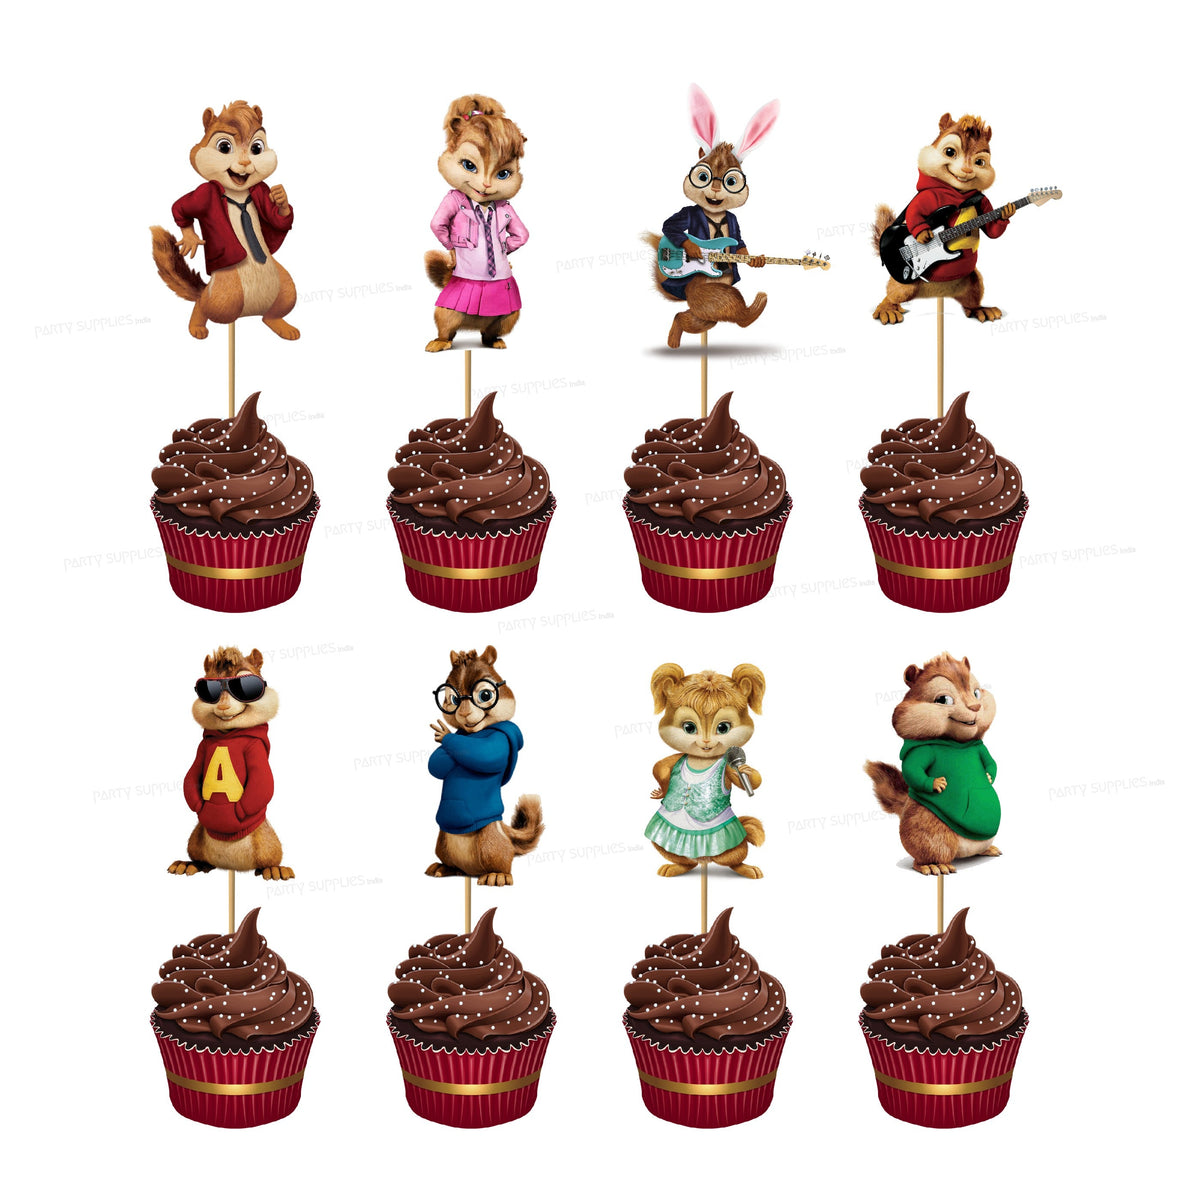 PSI Alvin and Chipmunks Theme Cup Cake Topper